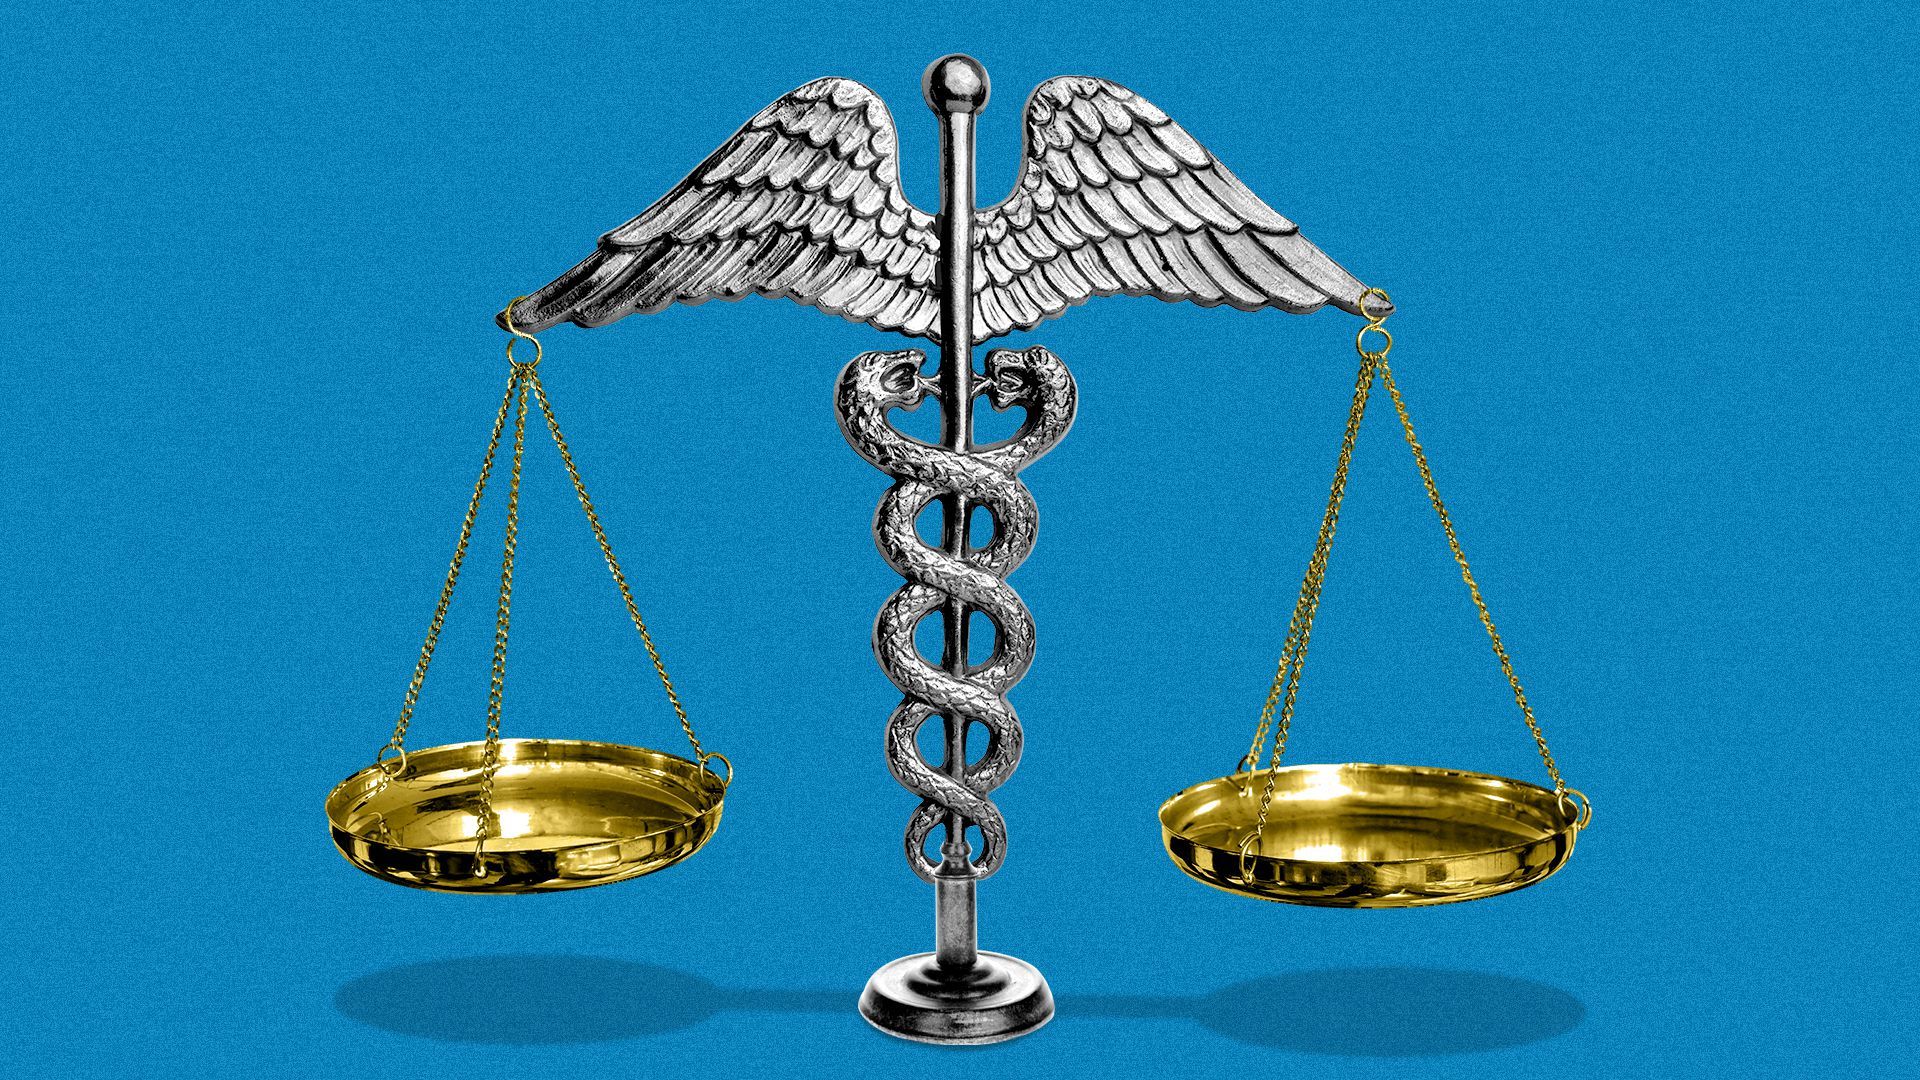 Illustration of the scales of justice hanging from a caduceus.